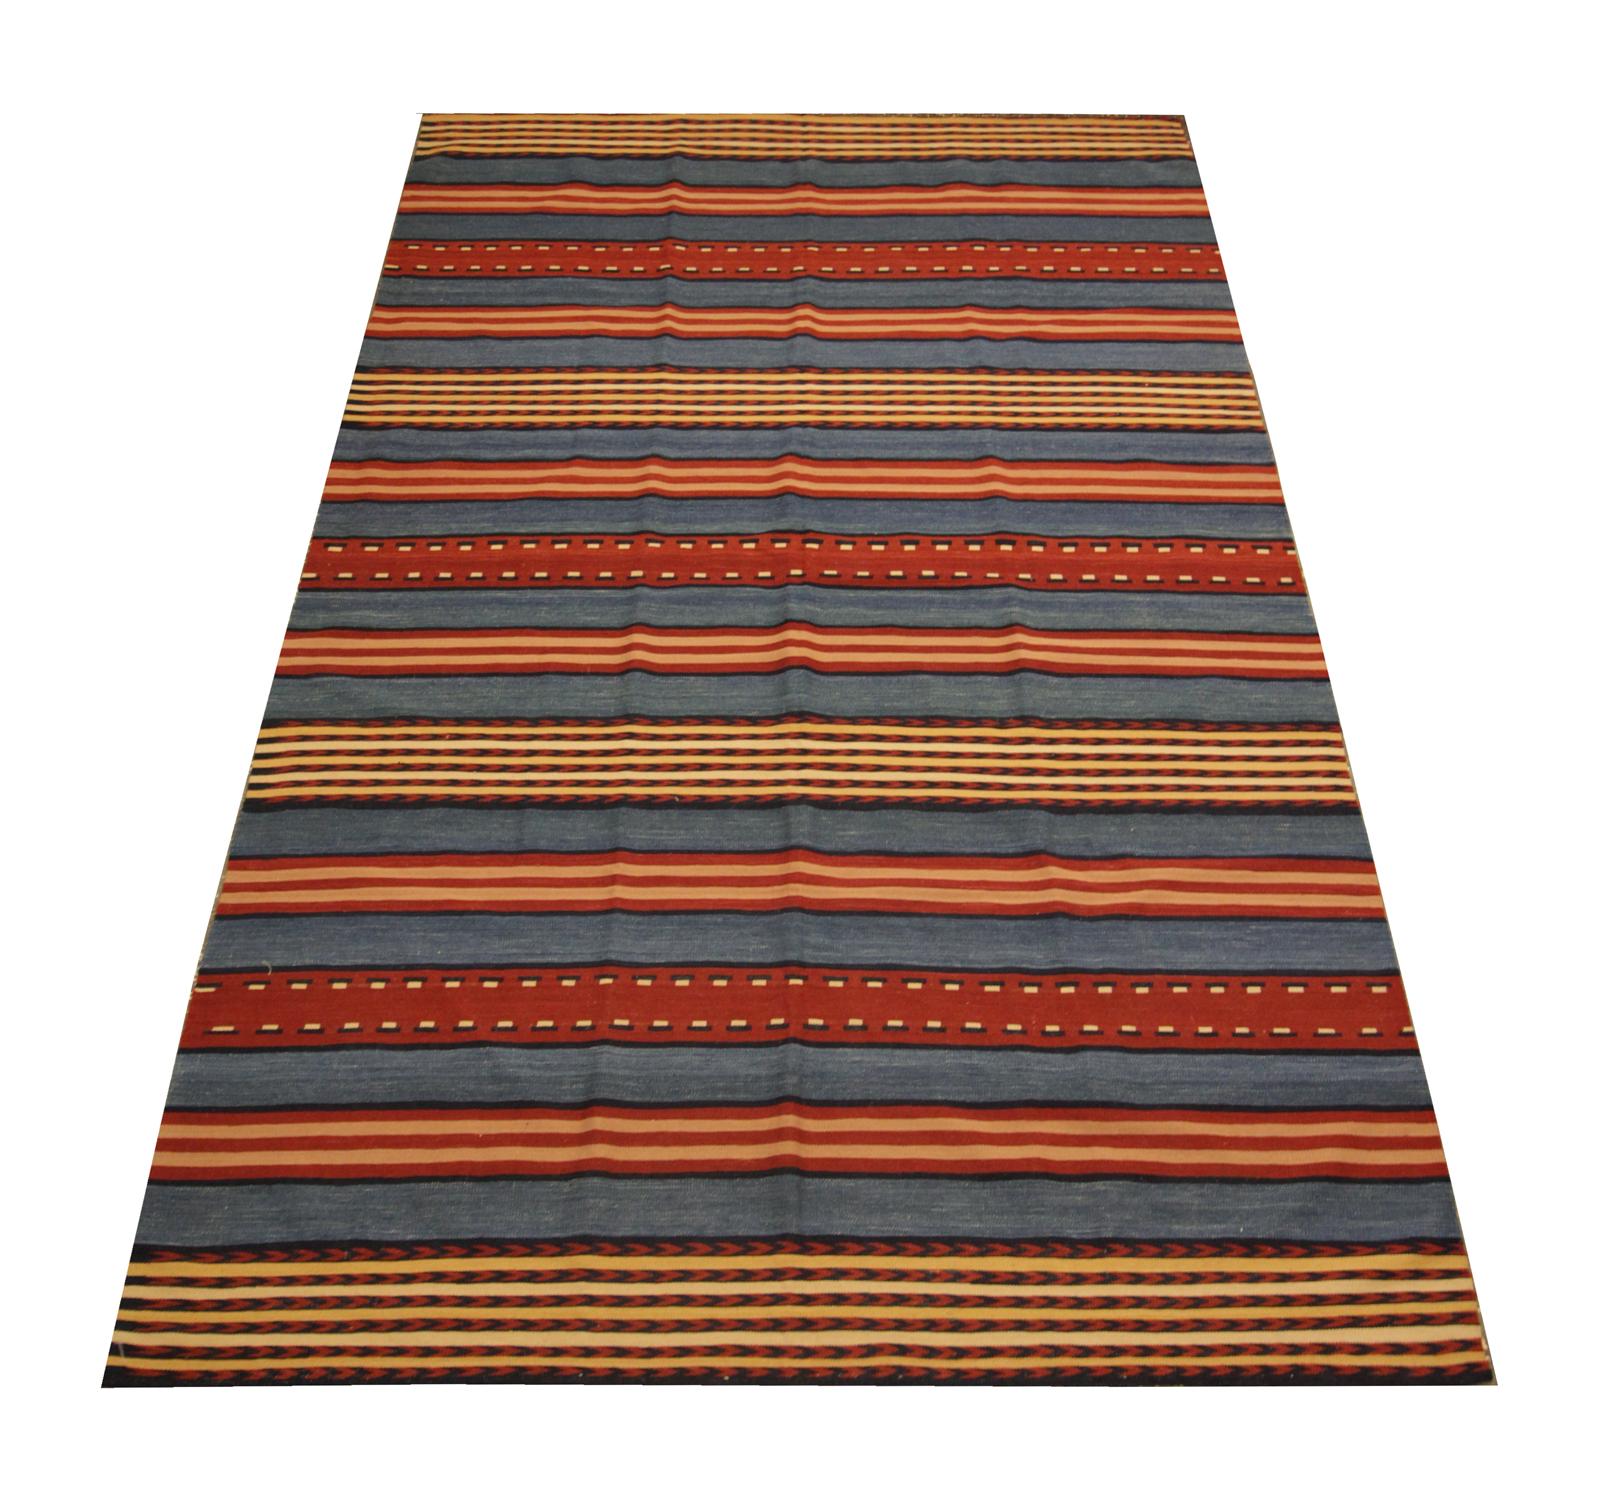 This fine wool Kilim is a modern handwoven flat-weave rug. Constructed with a simple stripe design in colours of blue and cream. The colour and design of this modern rug make it the perfect addition to any room. Suitable for styling with your